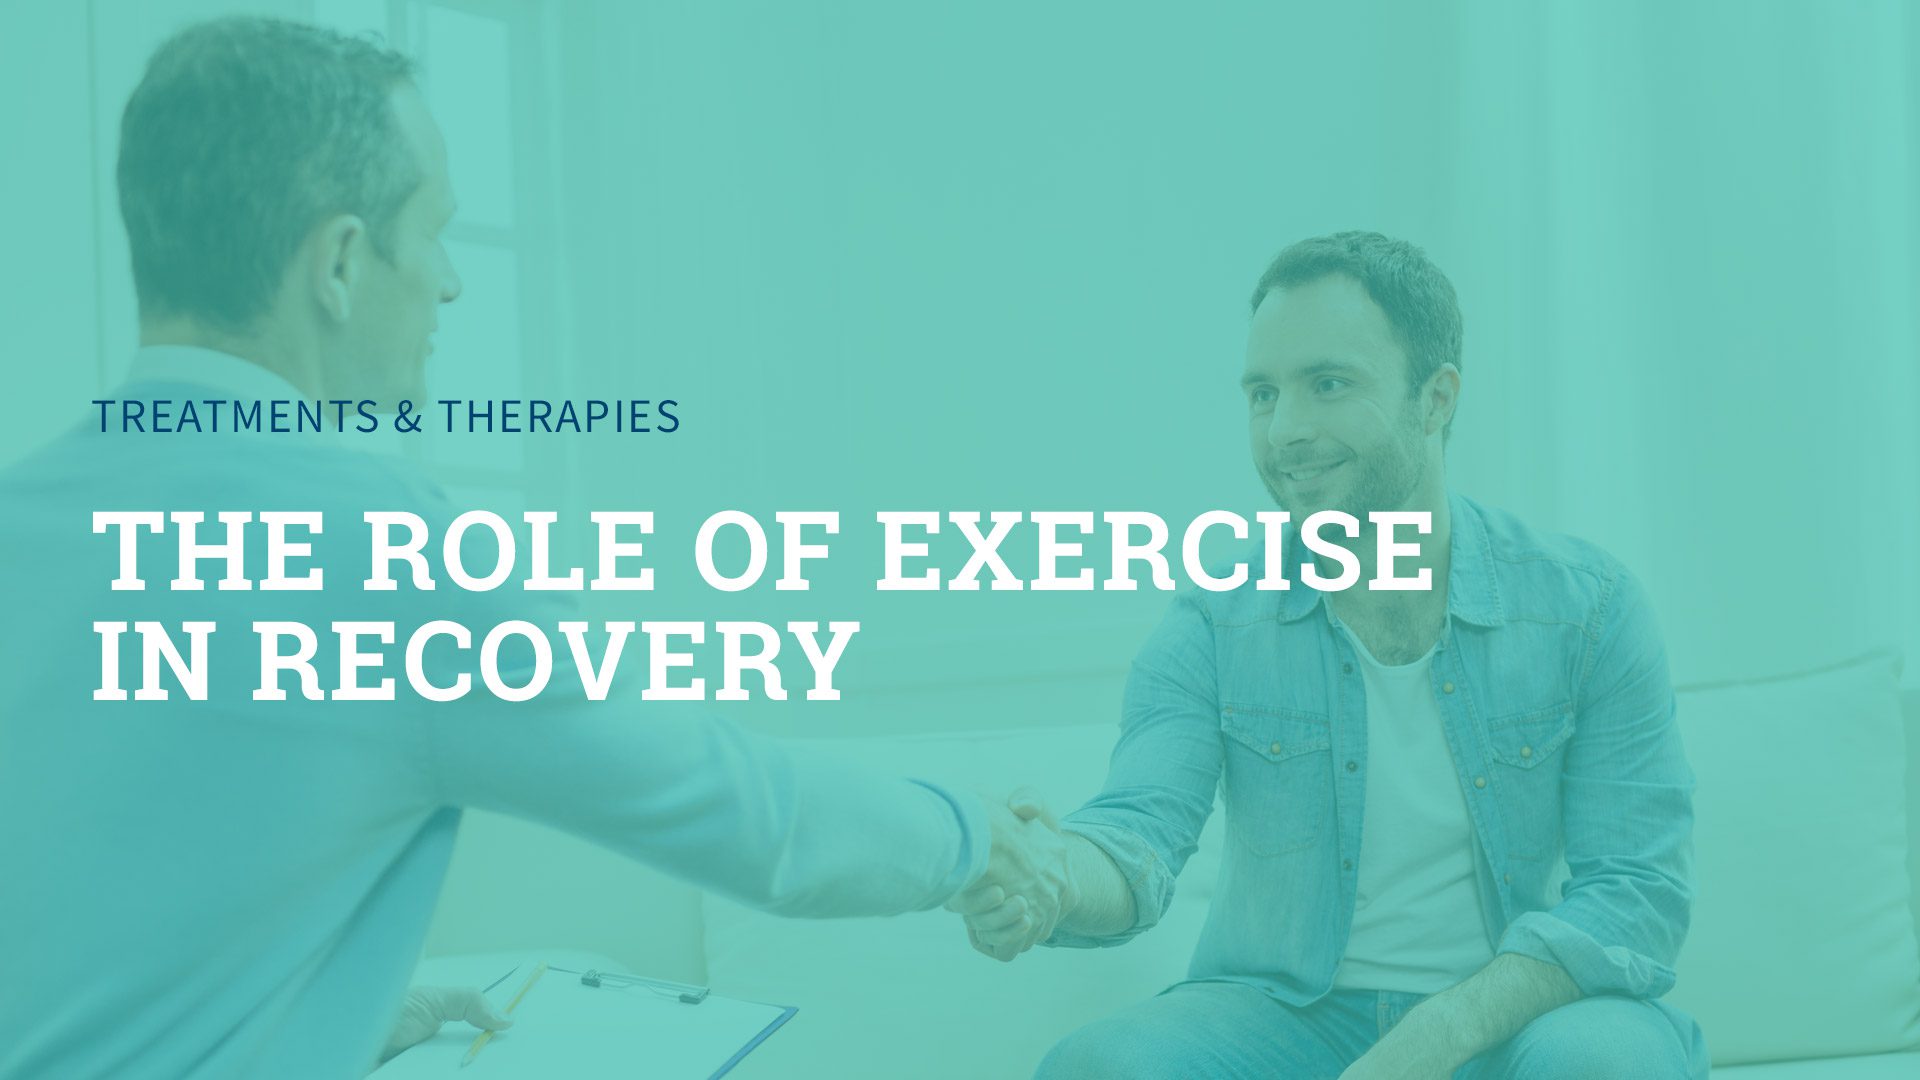 The Role of Exercise in Recovery